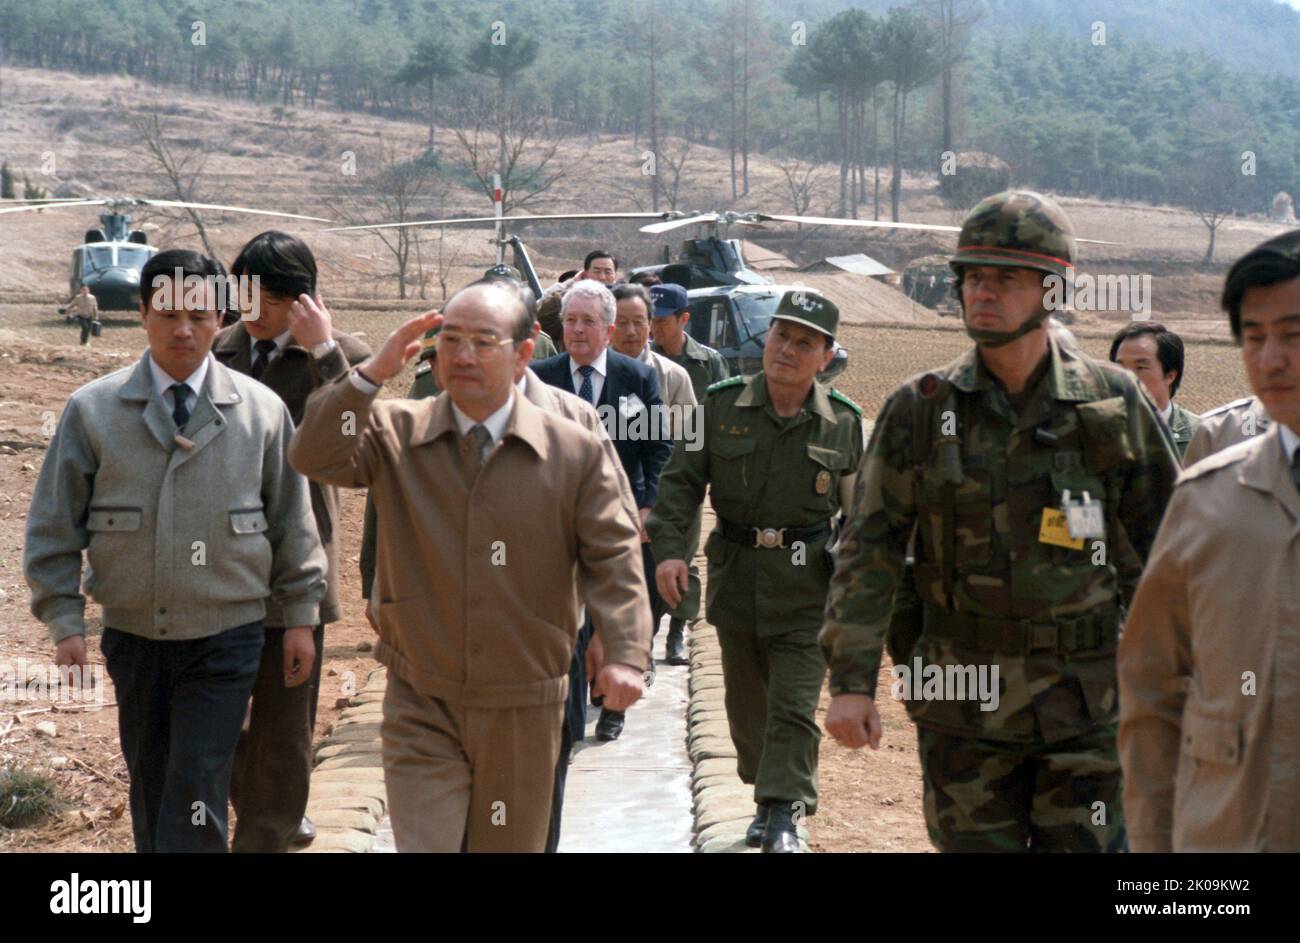 Korean President Chun Doo Hwan (centre) is escorted by Major General (MGEN) Claude M. Kicklighter, Commander, 25th Infantry Division, upon his arrival at division headquarters during the joint U.S./South Korean Exercise TEAM SPIRIT '85. 22 March 1985. Stock Photo